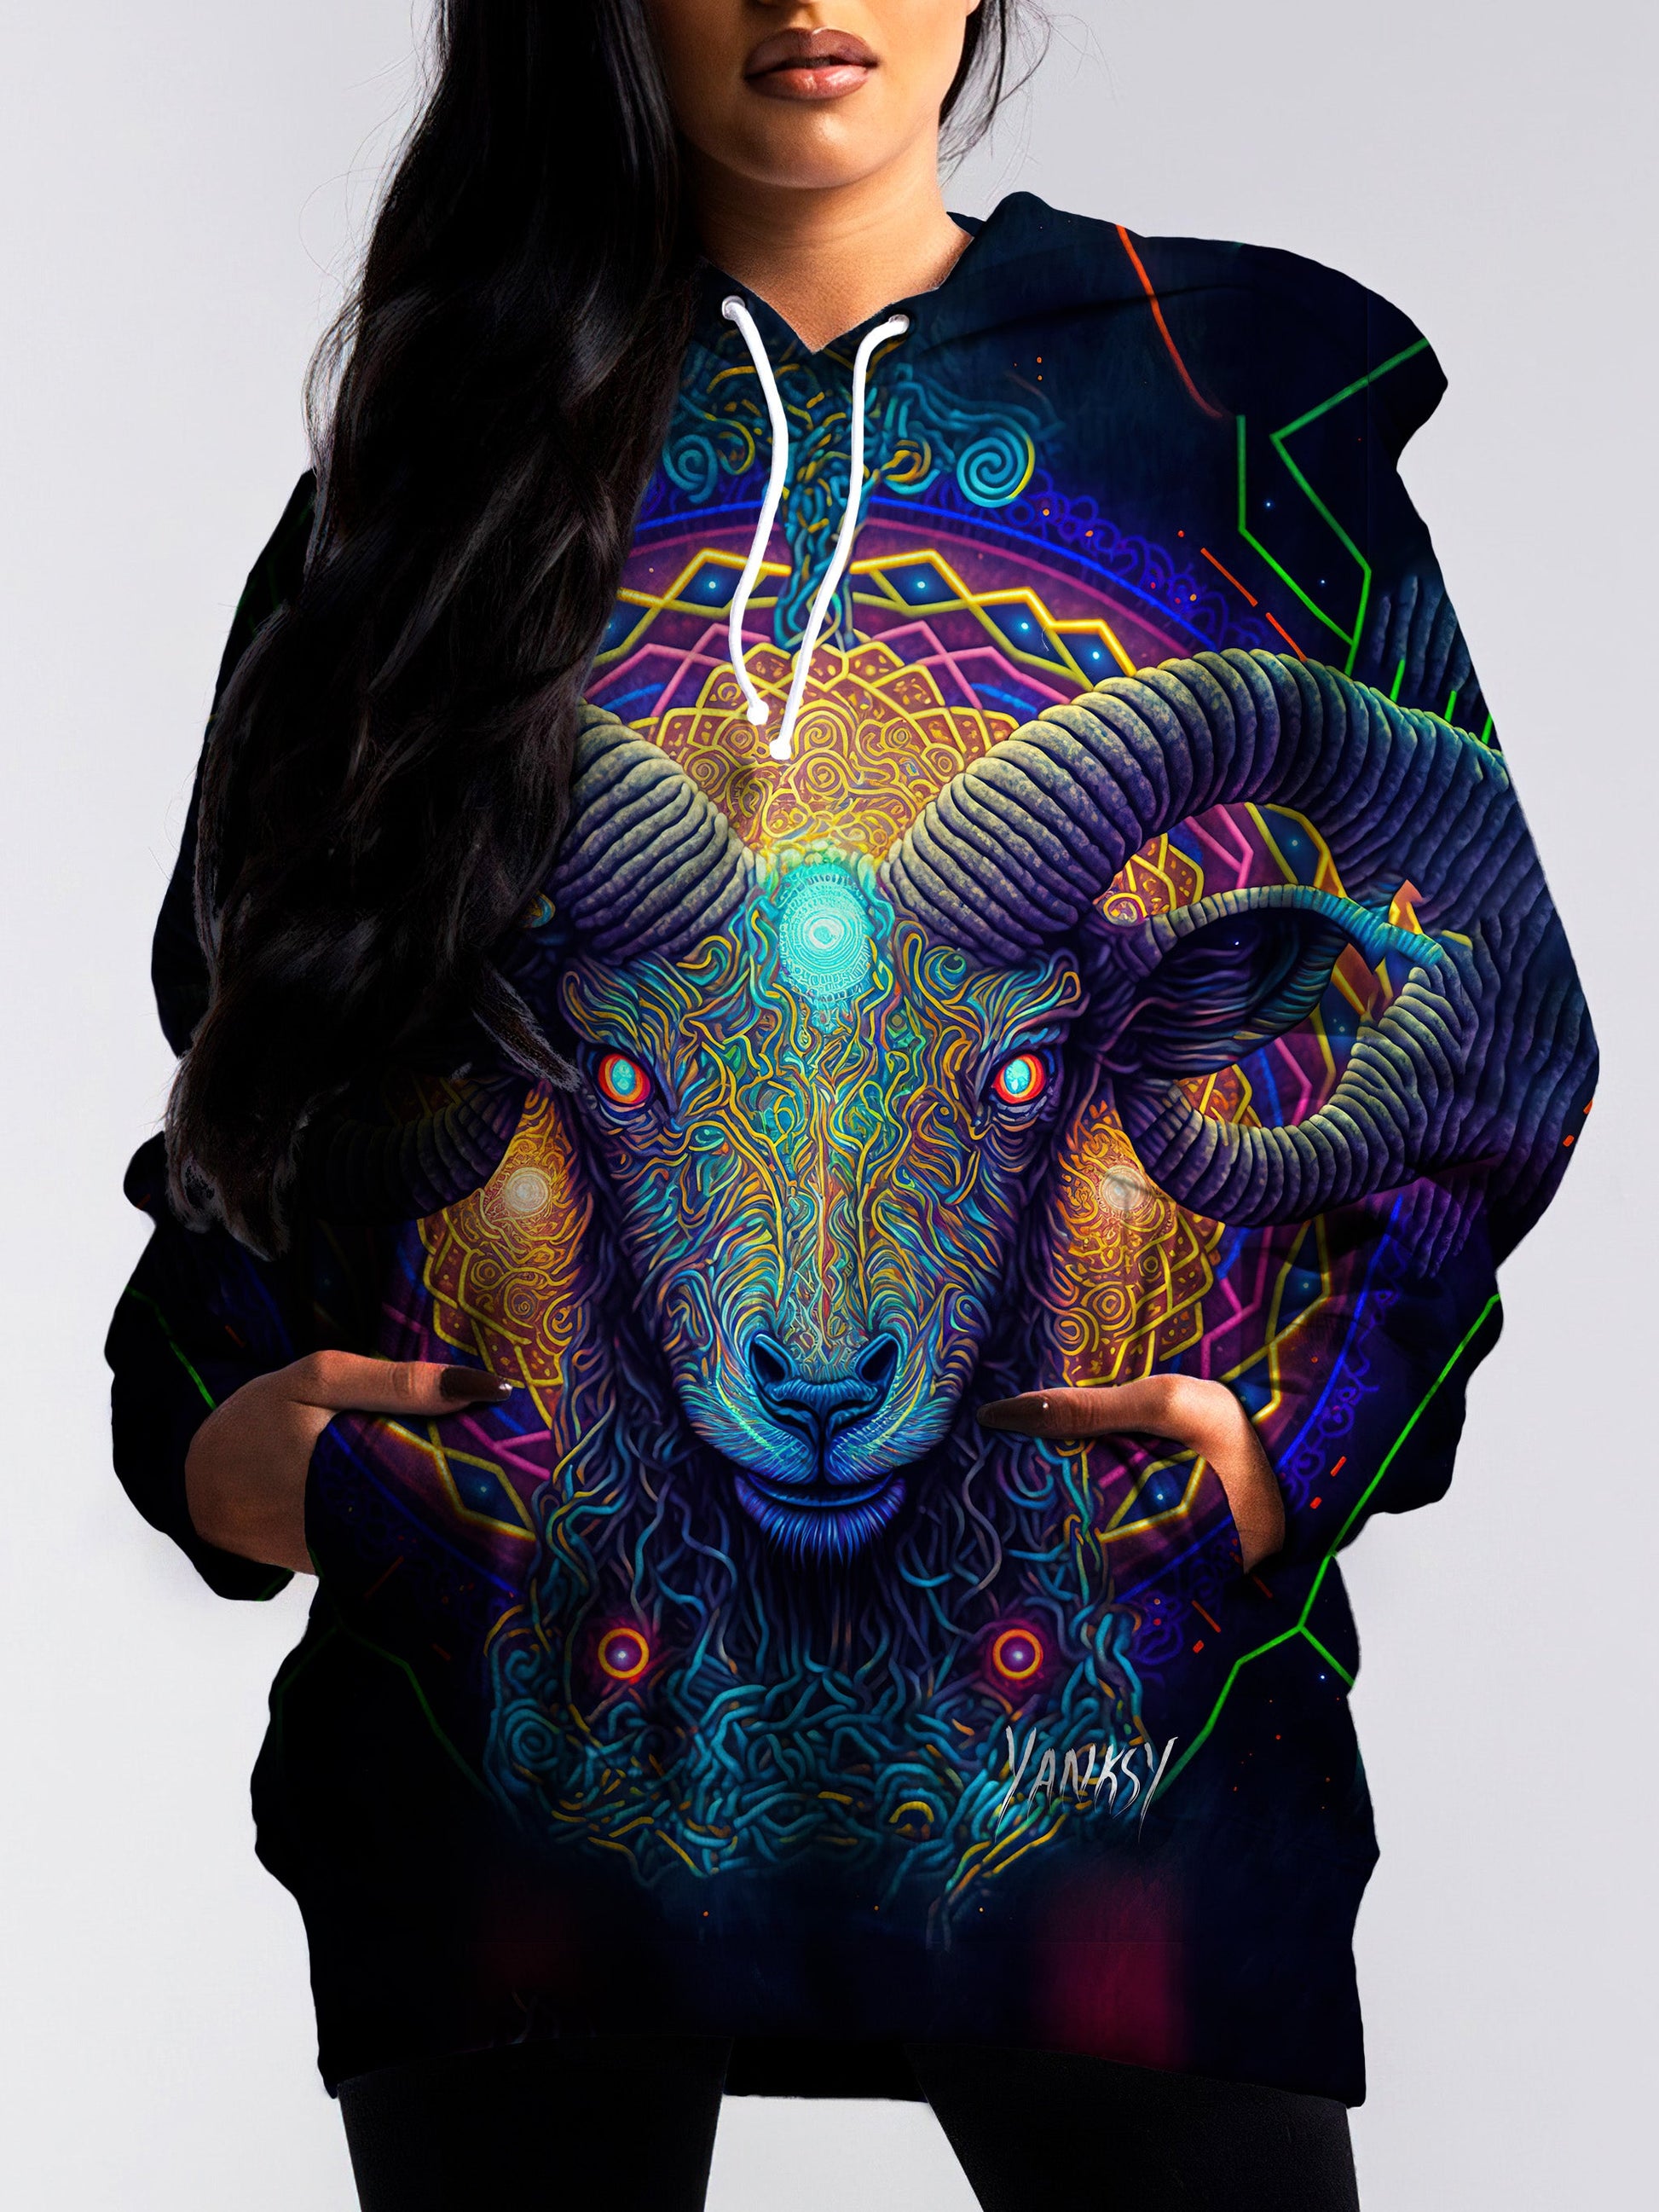 Stay warm and cozy at festivals and raves with this comfortable hoodie